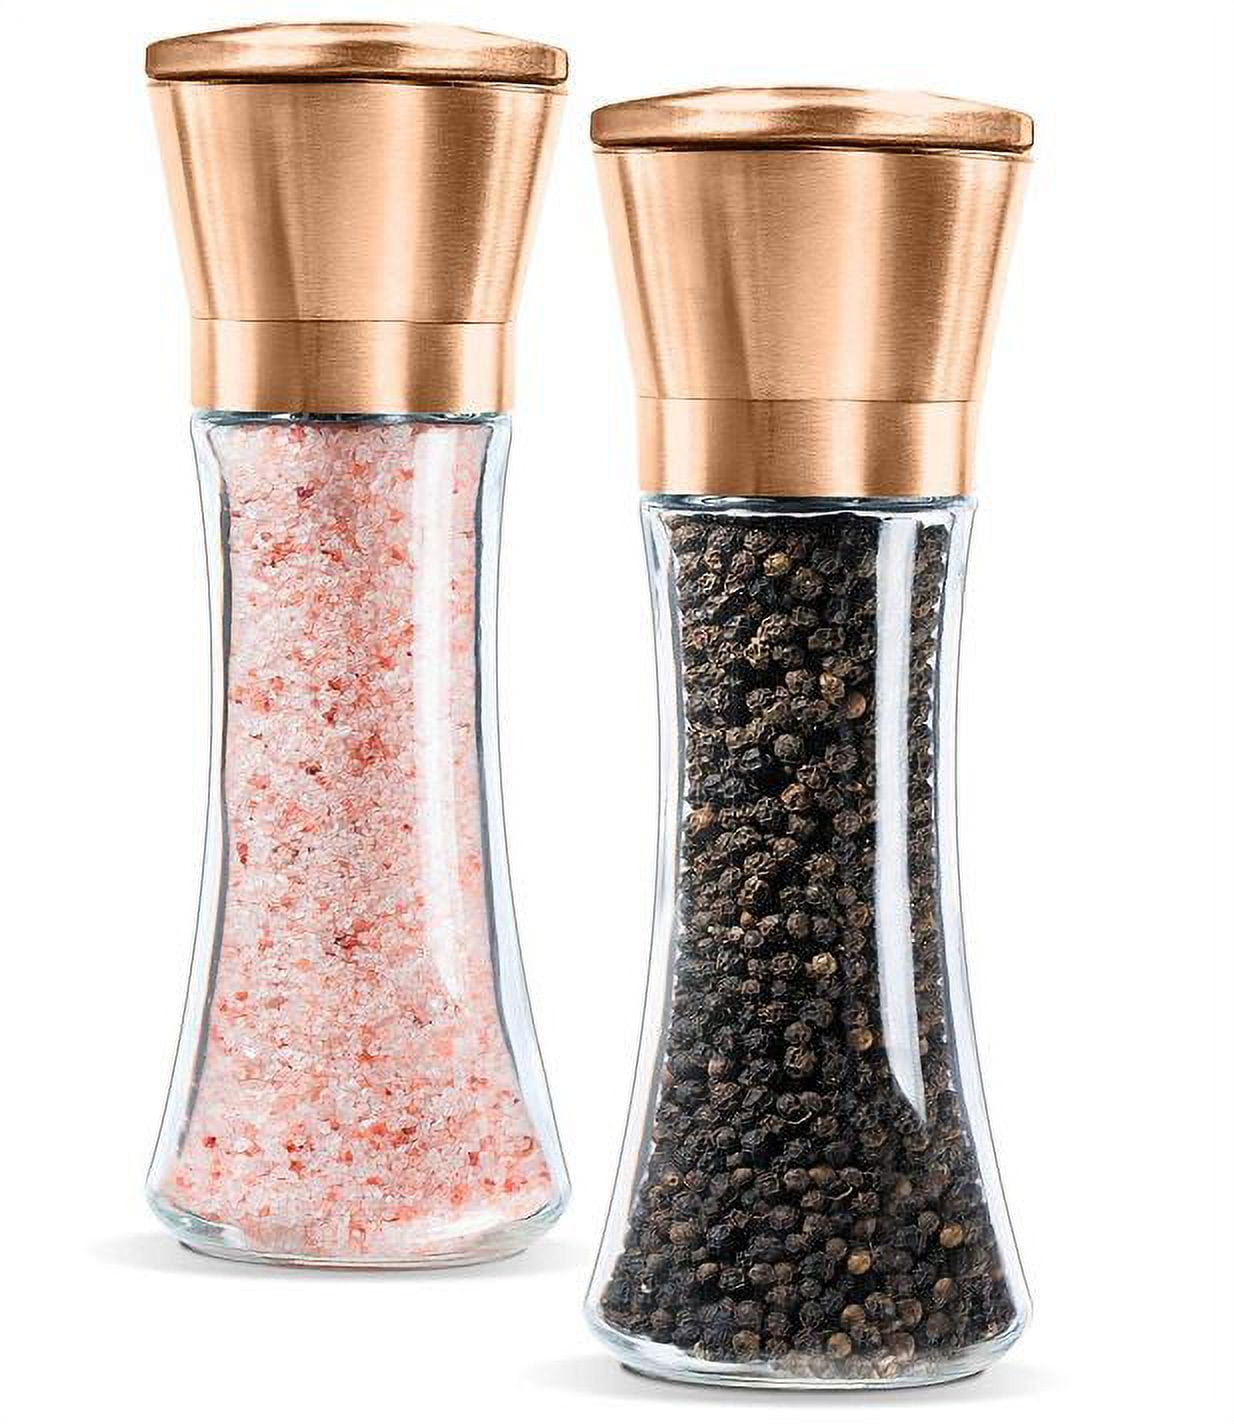 Benicci Premium Salt and Pepper Grinder Set of 2 - Two Refillable, Stainless Steel Sea & Spice Shakers with Adjustable Coarse Mills Easy Clean Ceramic